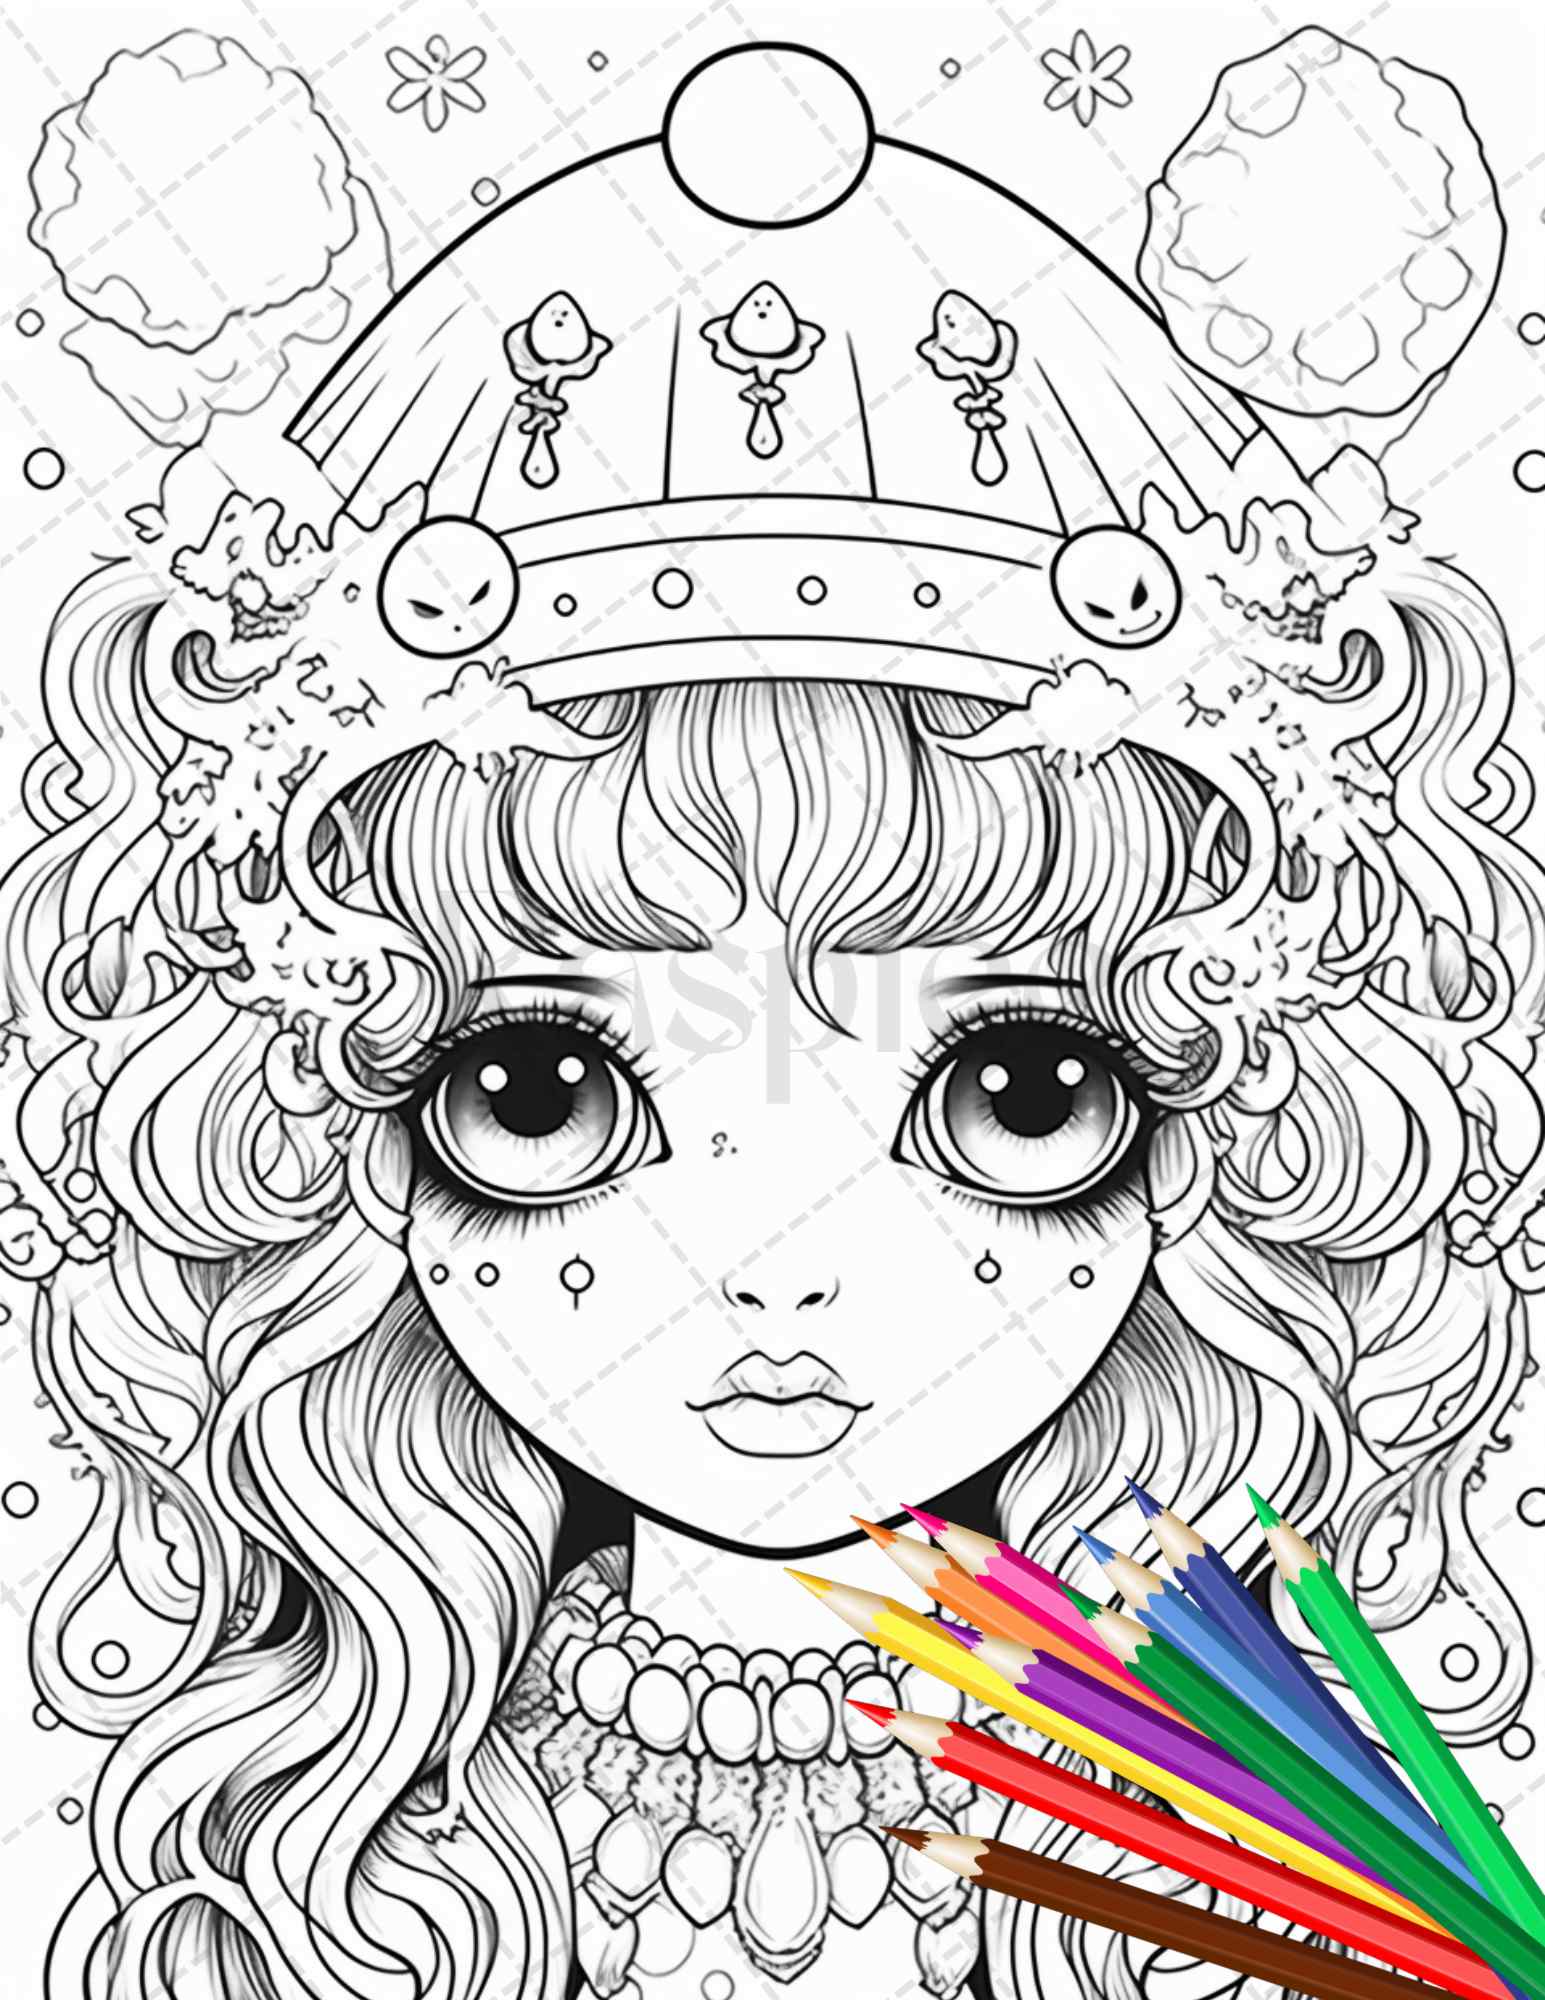 Adult Coloring Book Art Therapy Volume 2 Printable PDF Coloring Book  Digital Download, Print at Home 20 Adult Coloring Page Patterns 